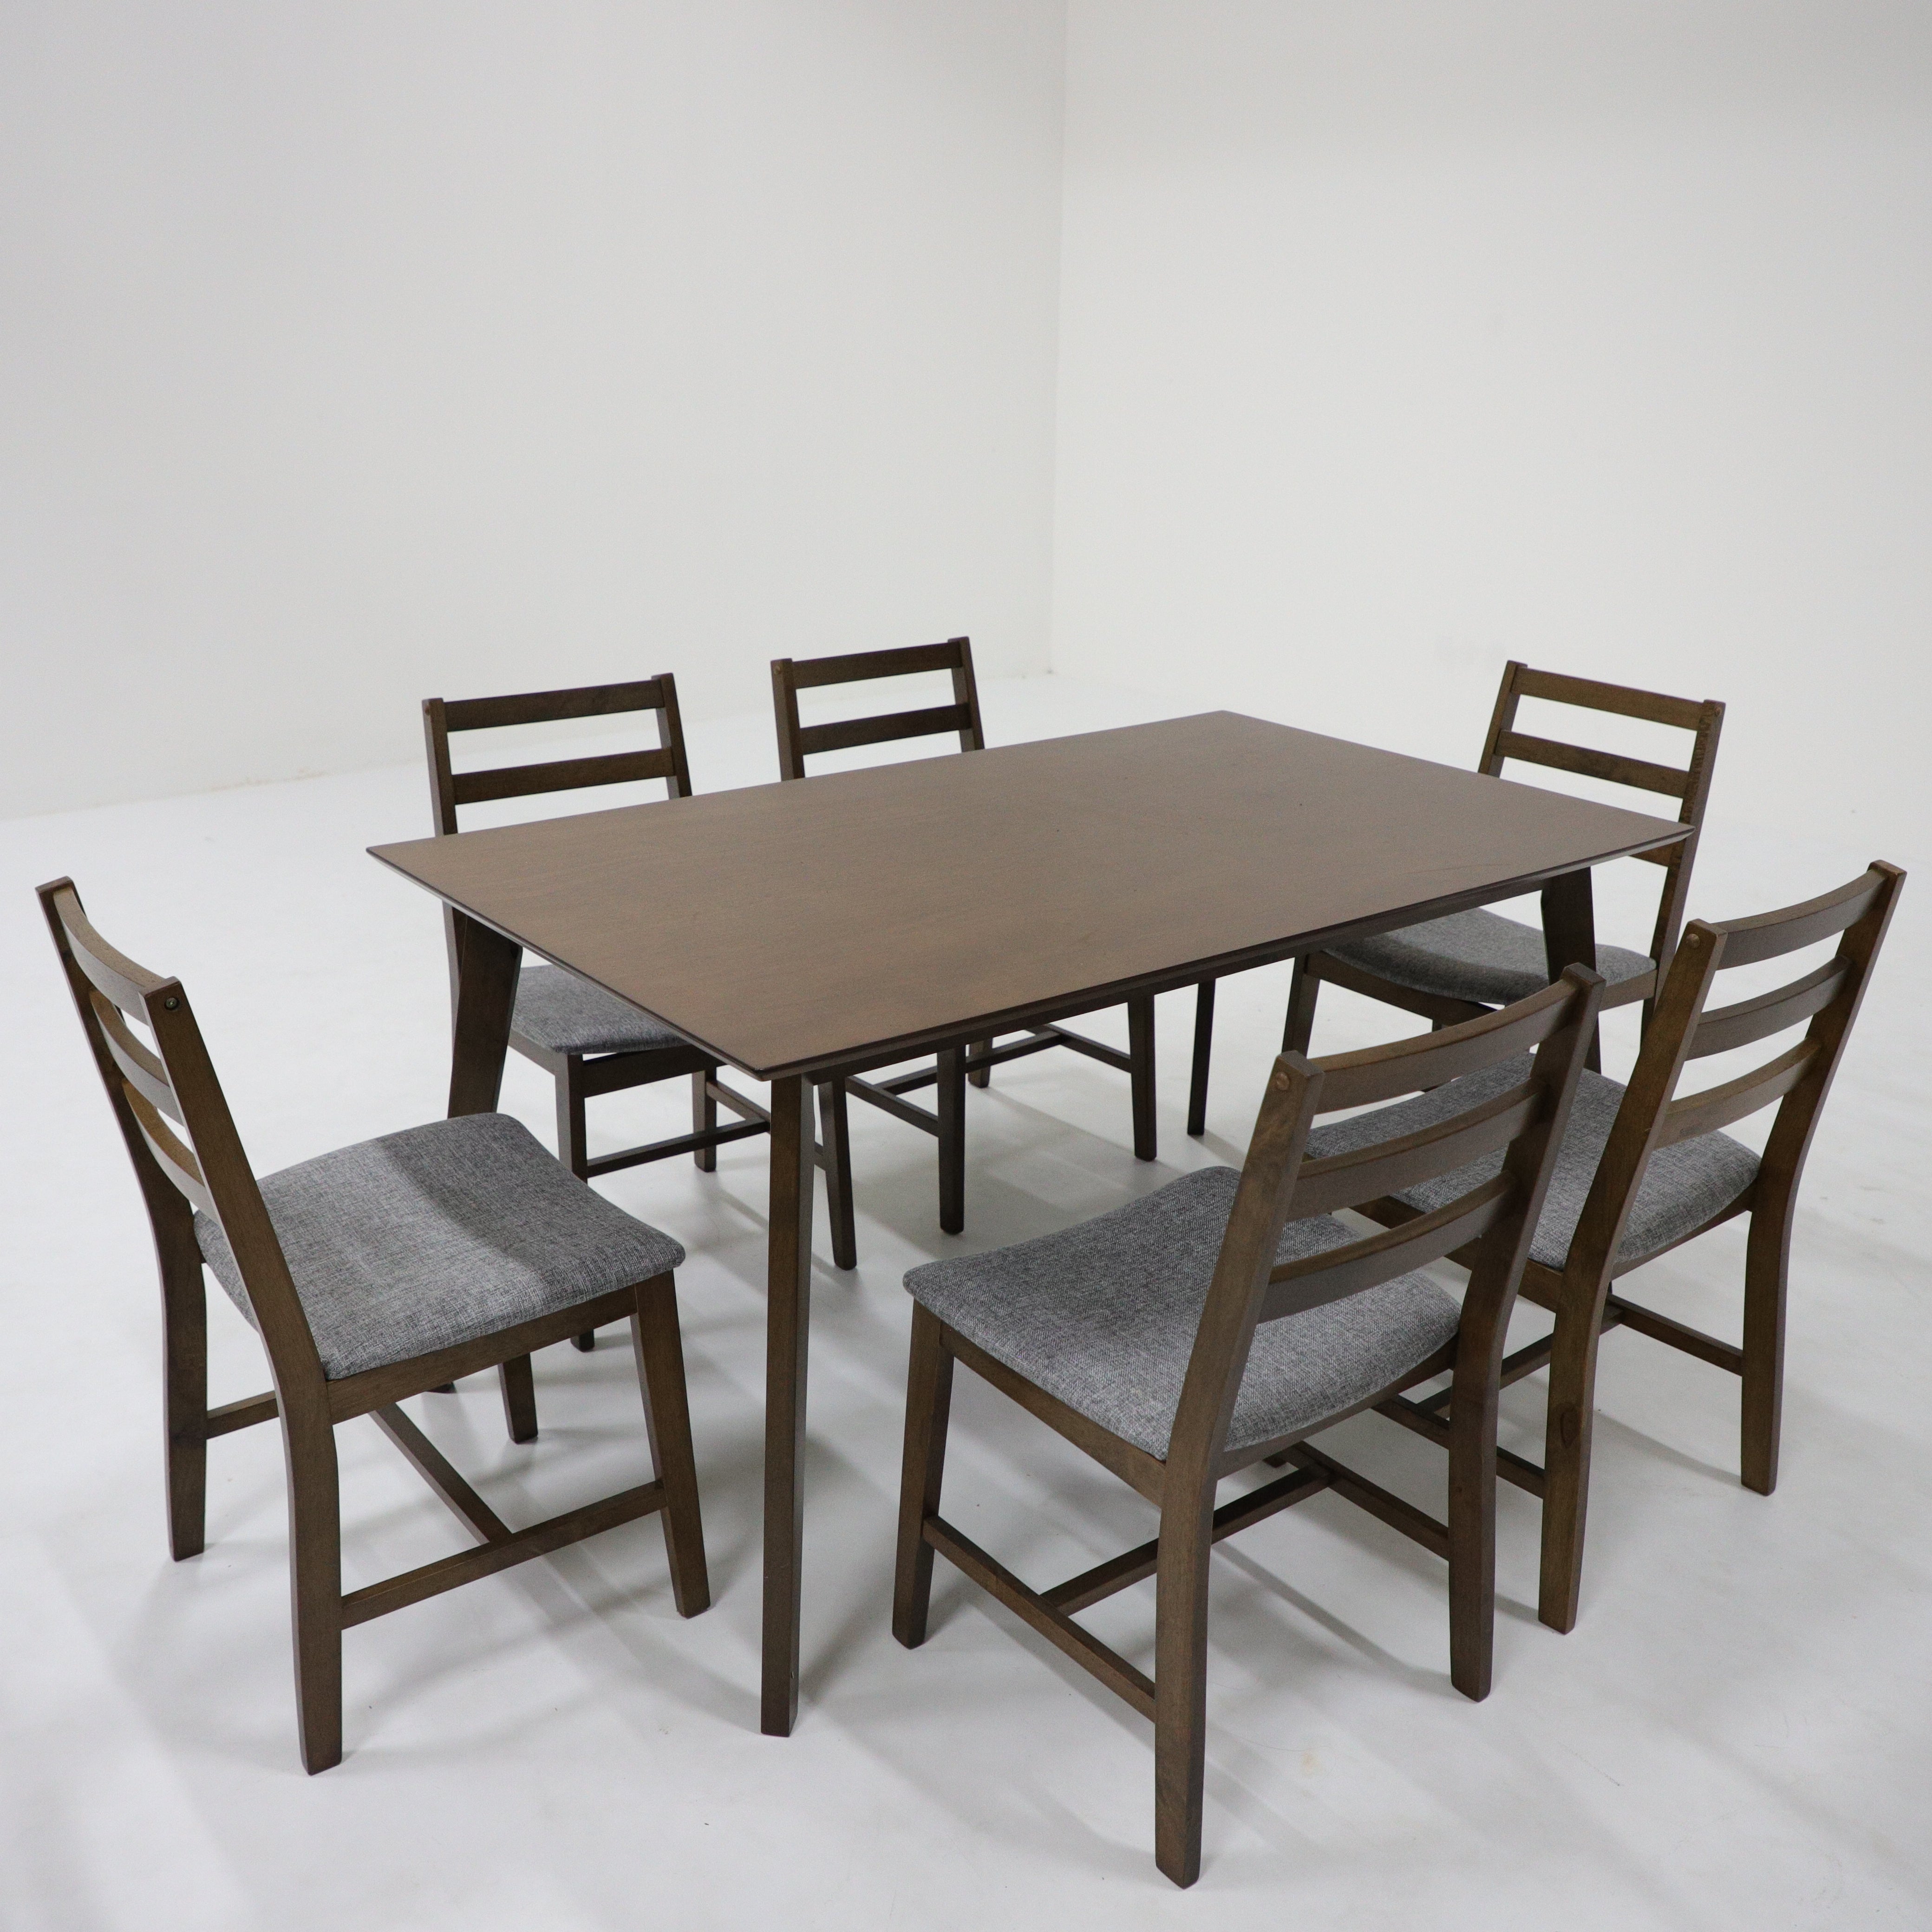 Anthem Dining Set (1 Table + 6 Chairs)